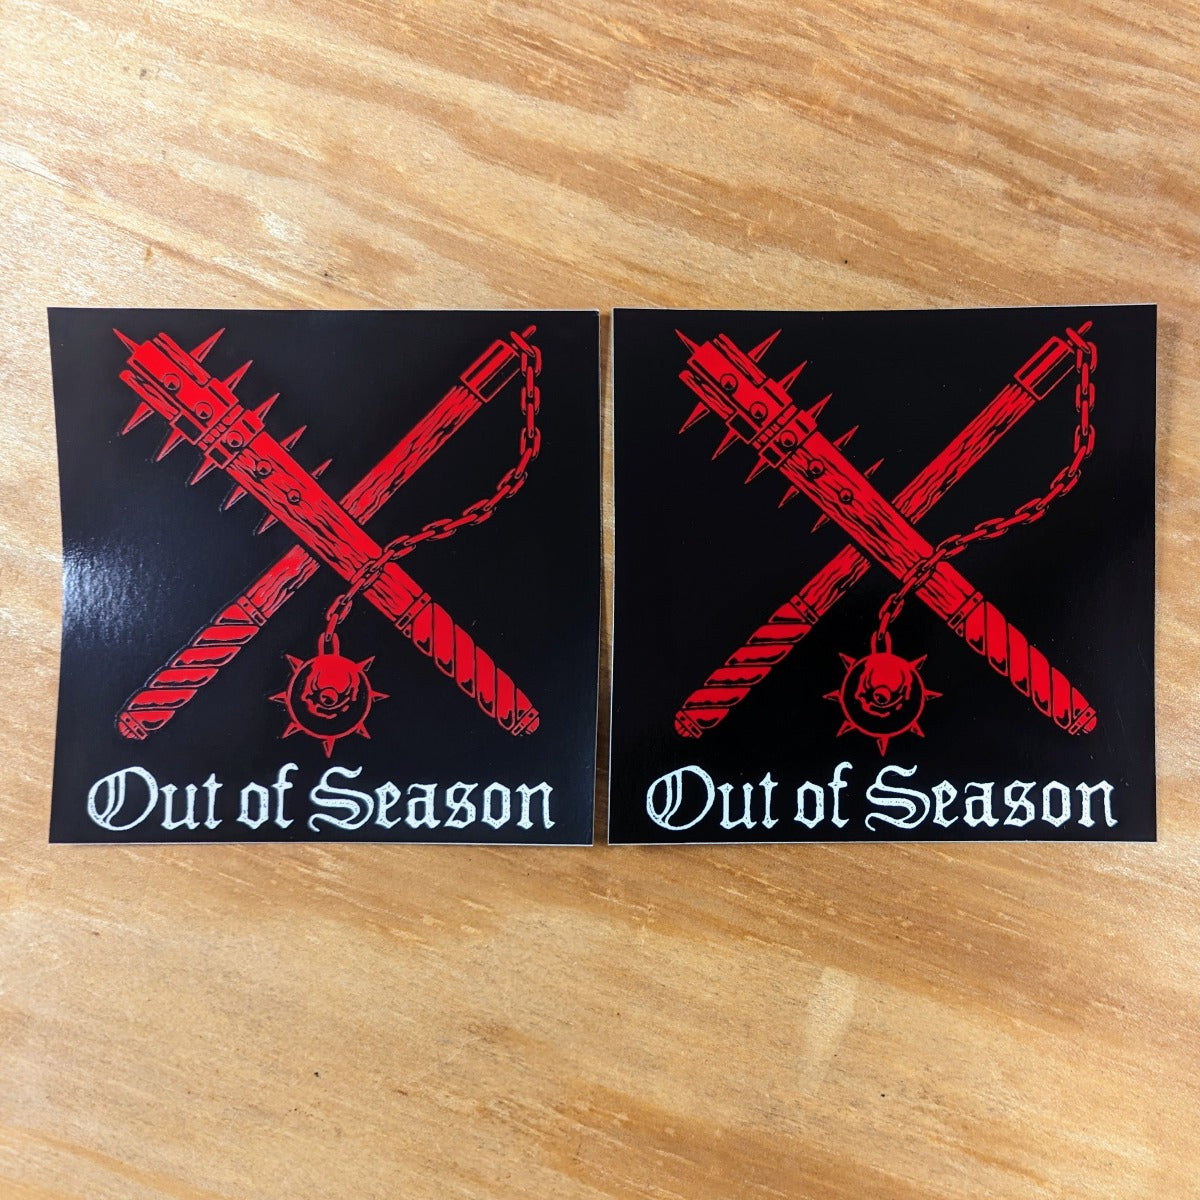 OUT OF SEASON "Black and Red" 4 inch stickers